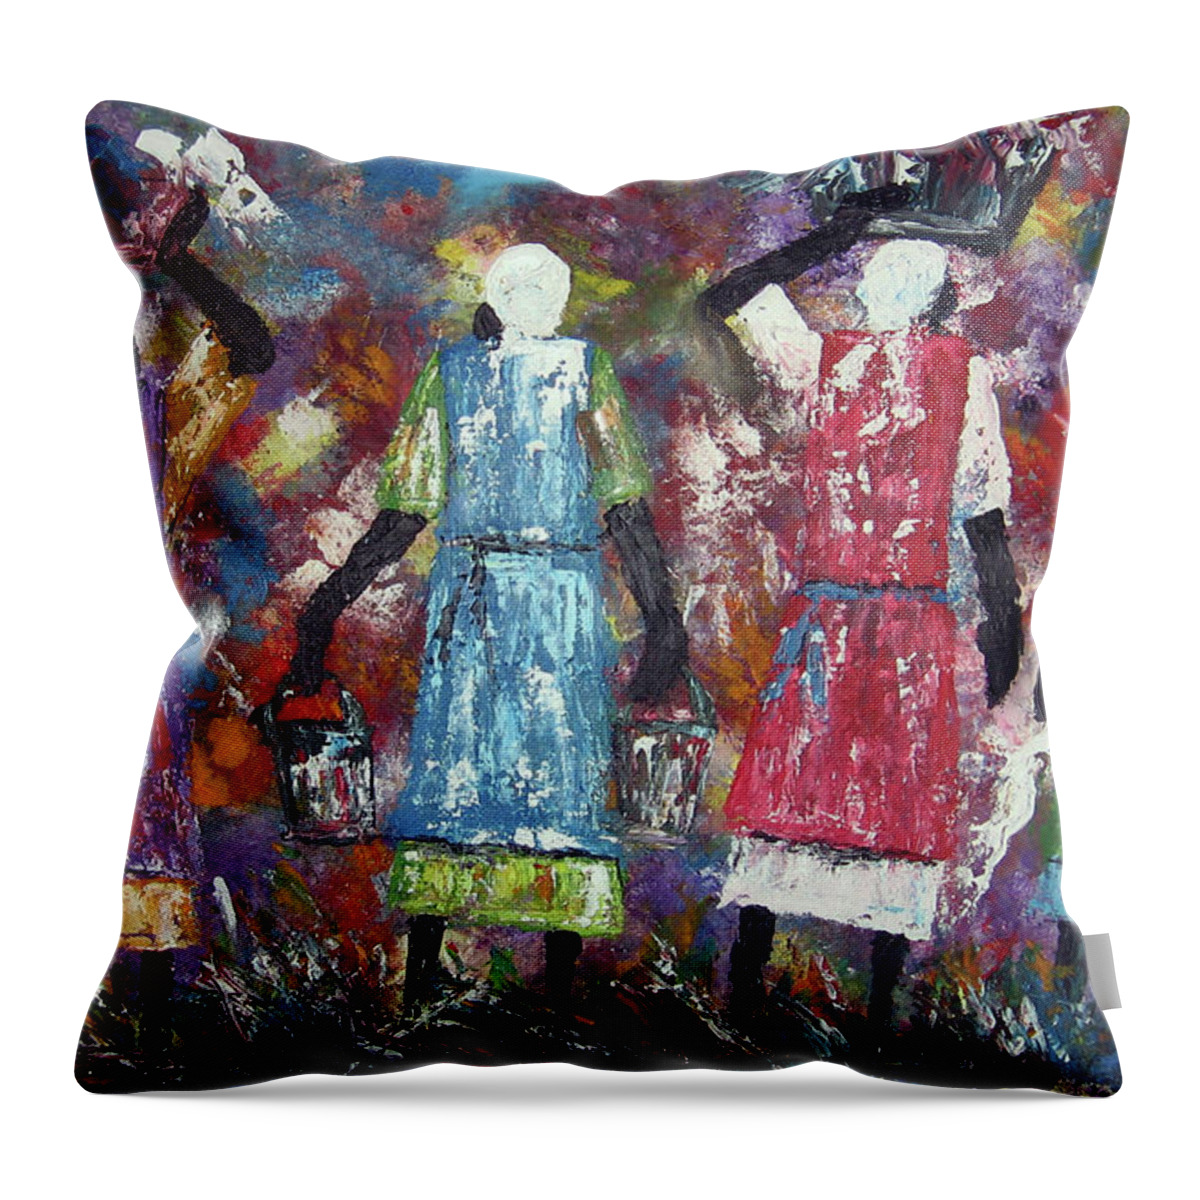  Throw Pillow featuring the painting Mothers Come Home by Peter Sibeko